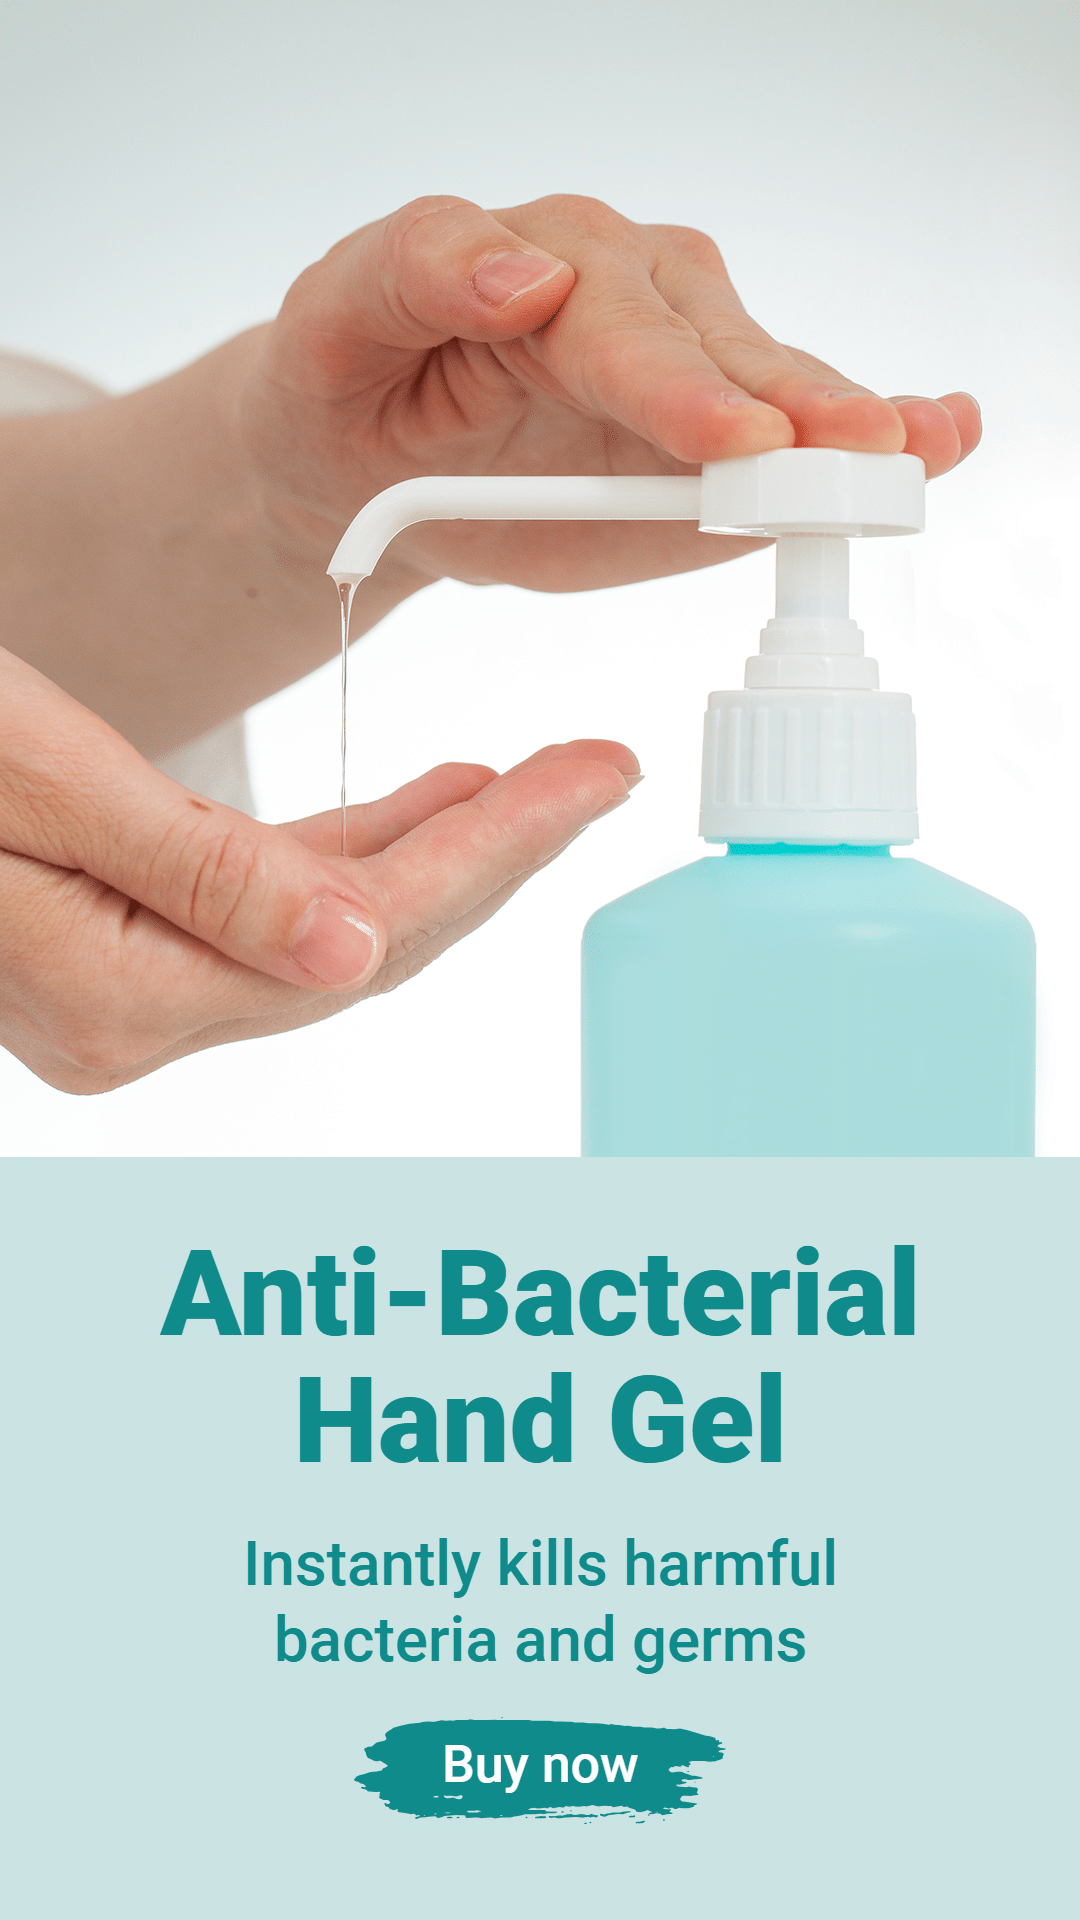 Simple Anti-Bacterial Hand Gel Promotion Ecommerce Story